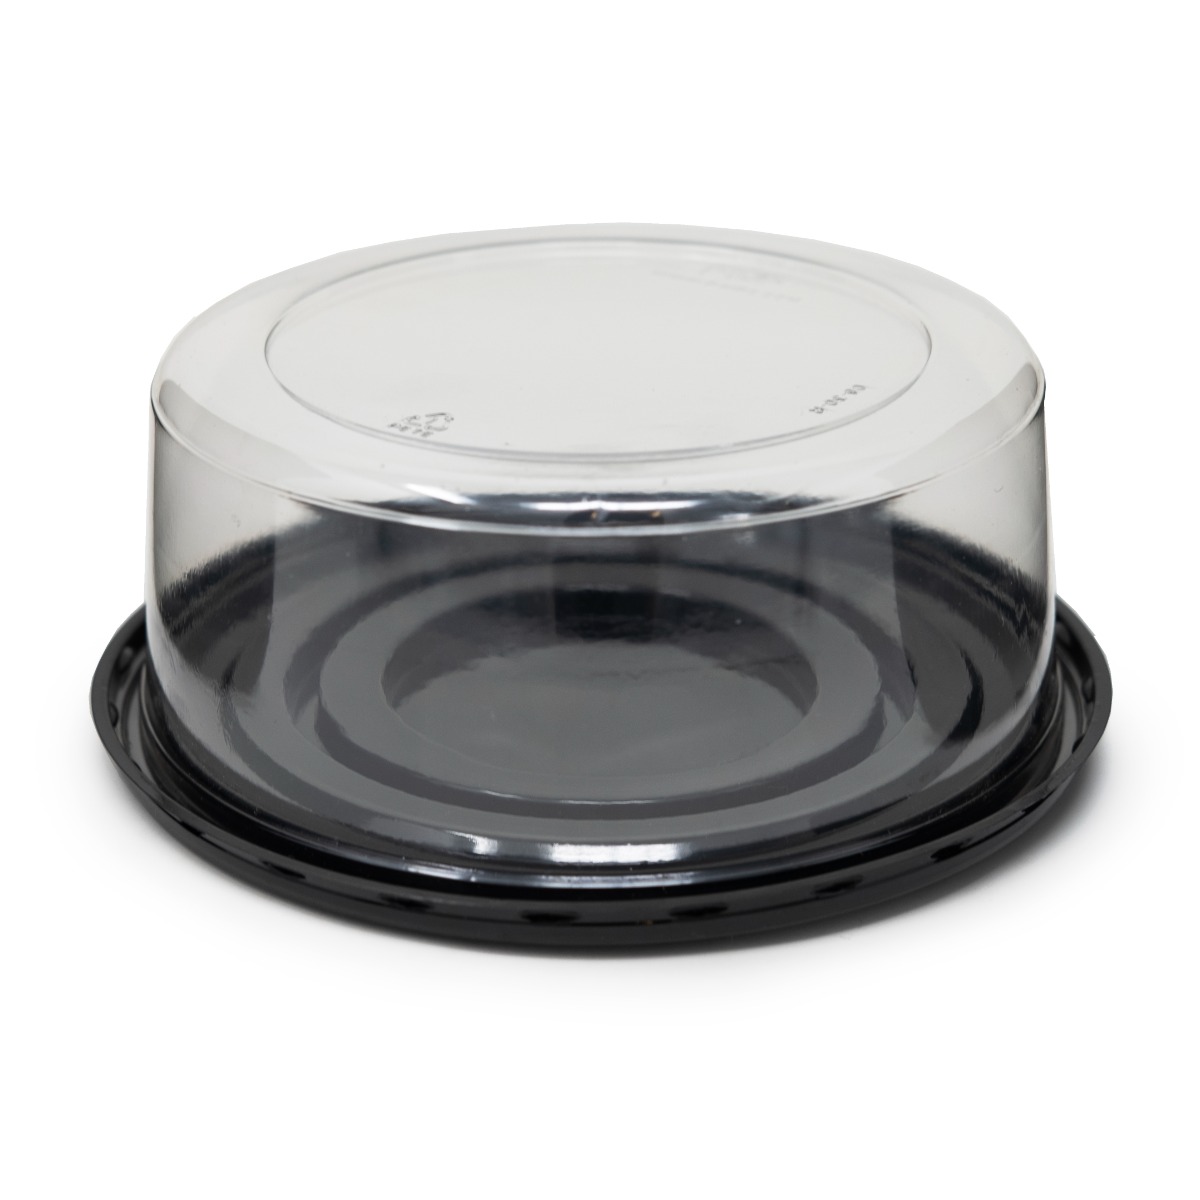 7 CAKE CONTAINER - 9 1/2 BLACK BASE - 4 TALL - 100/CASE - Wow Plastics,  Inc.